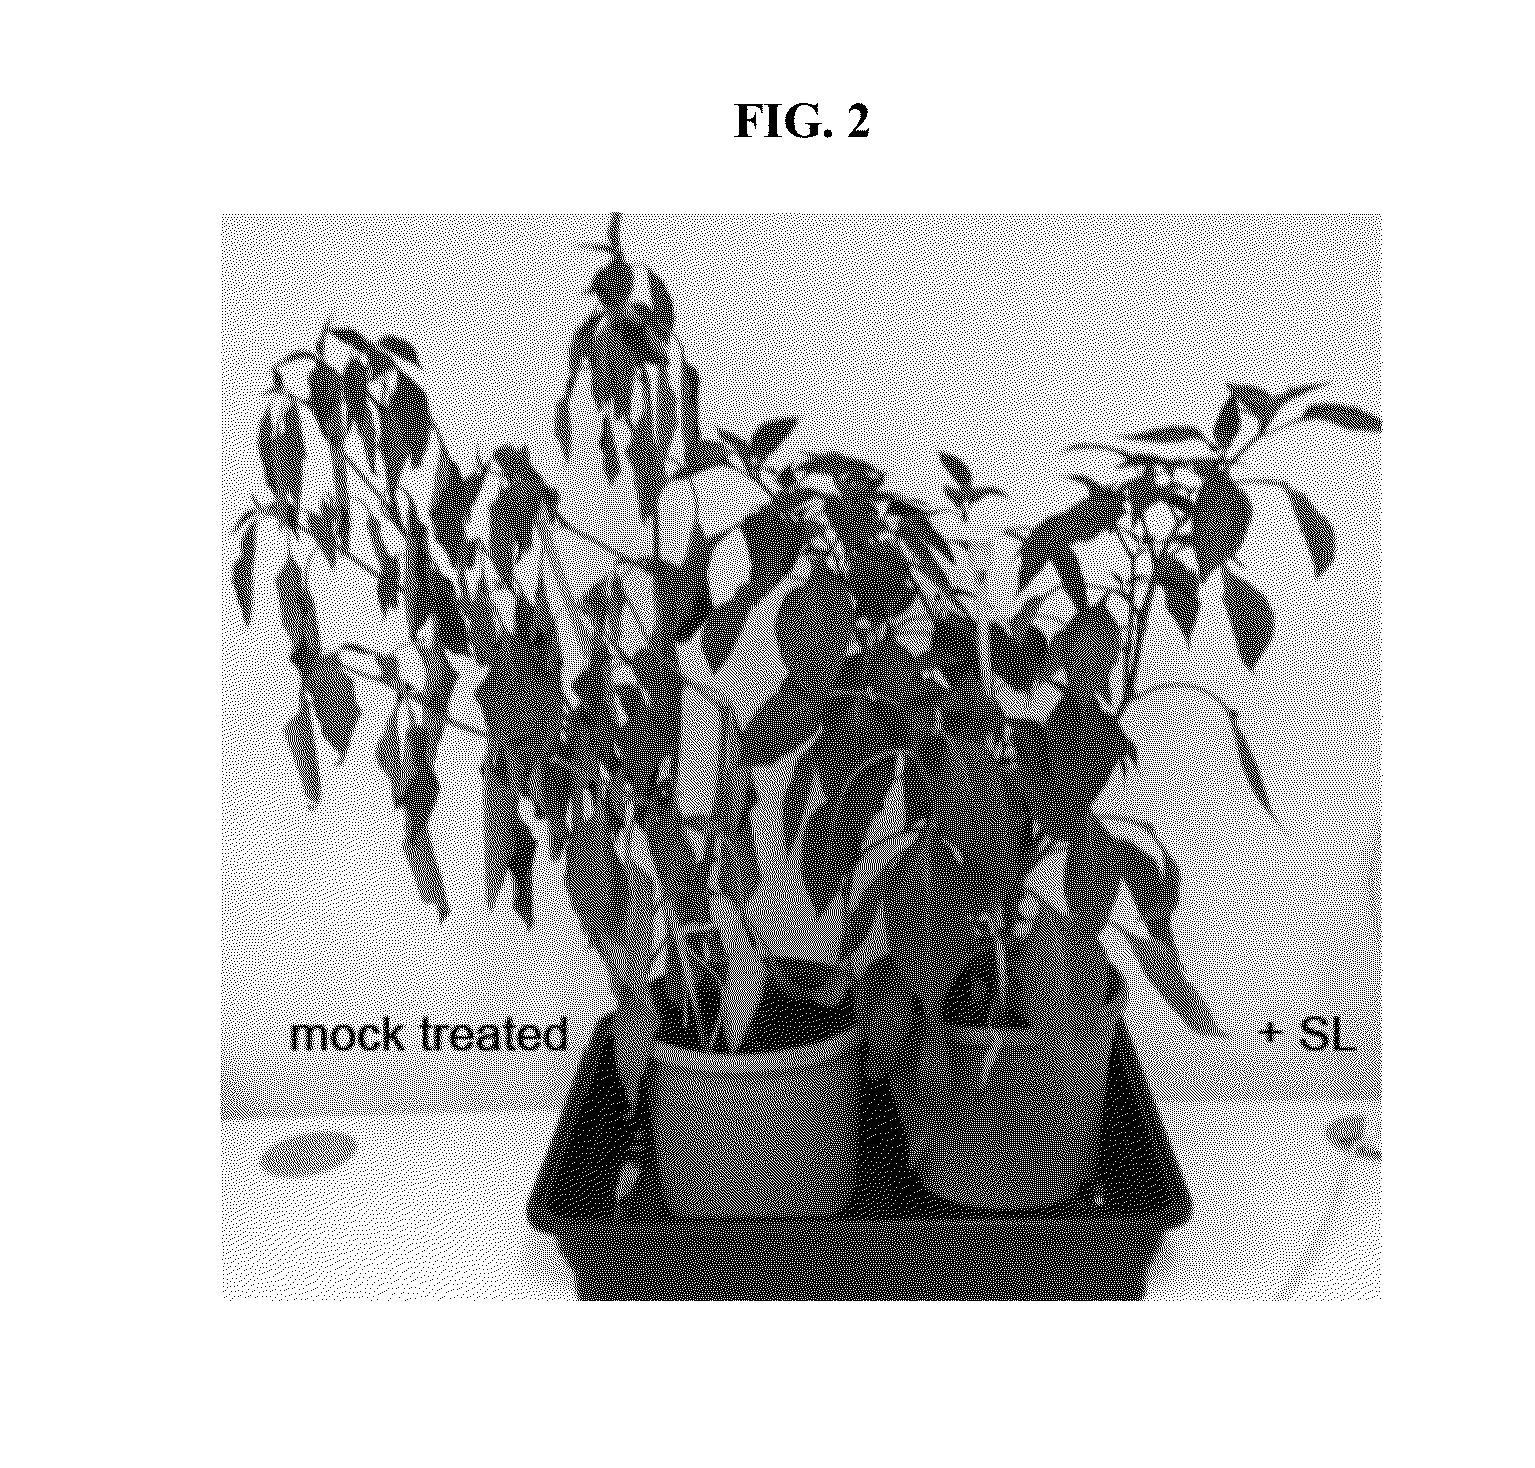 Strigolactone formulations and uses thereof